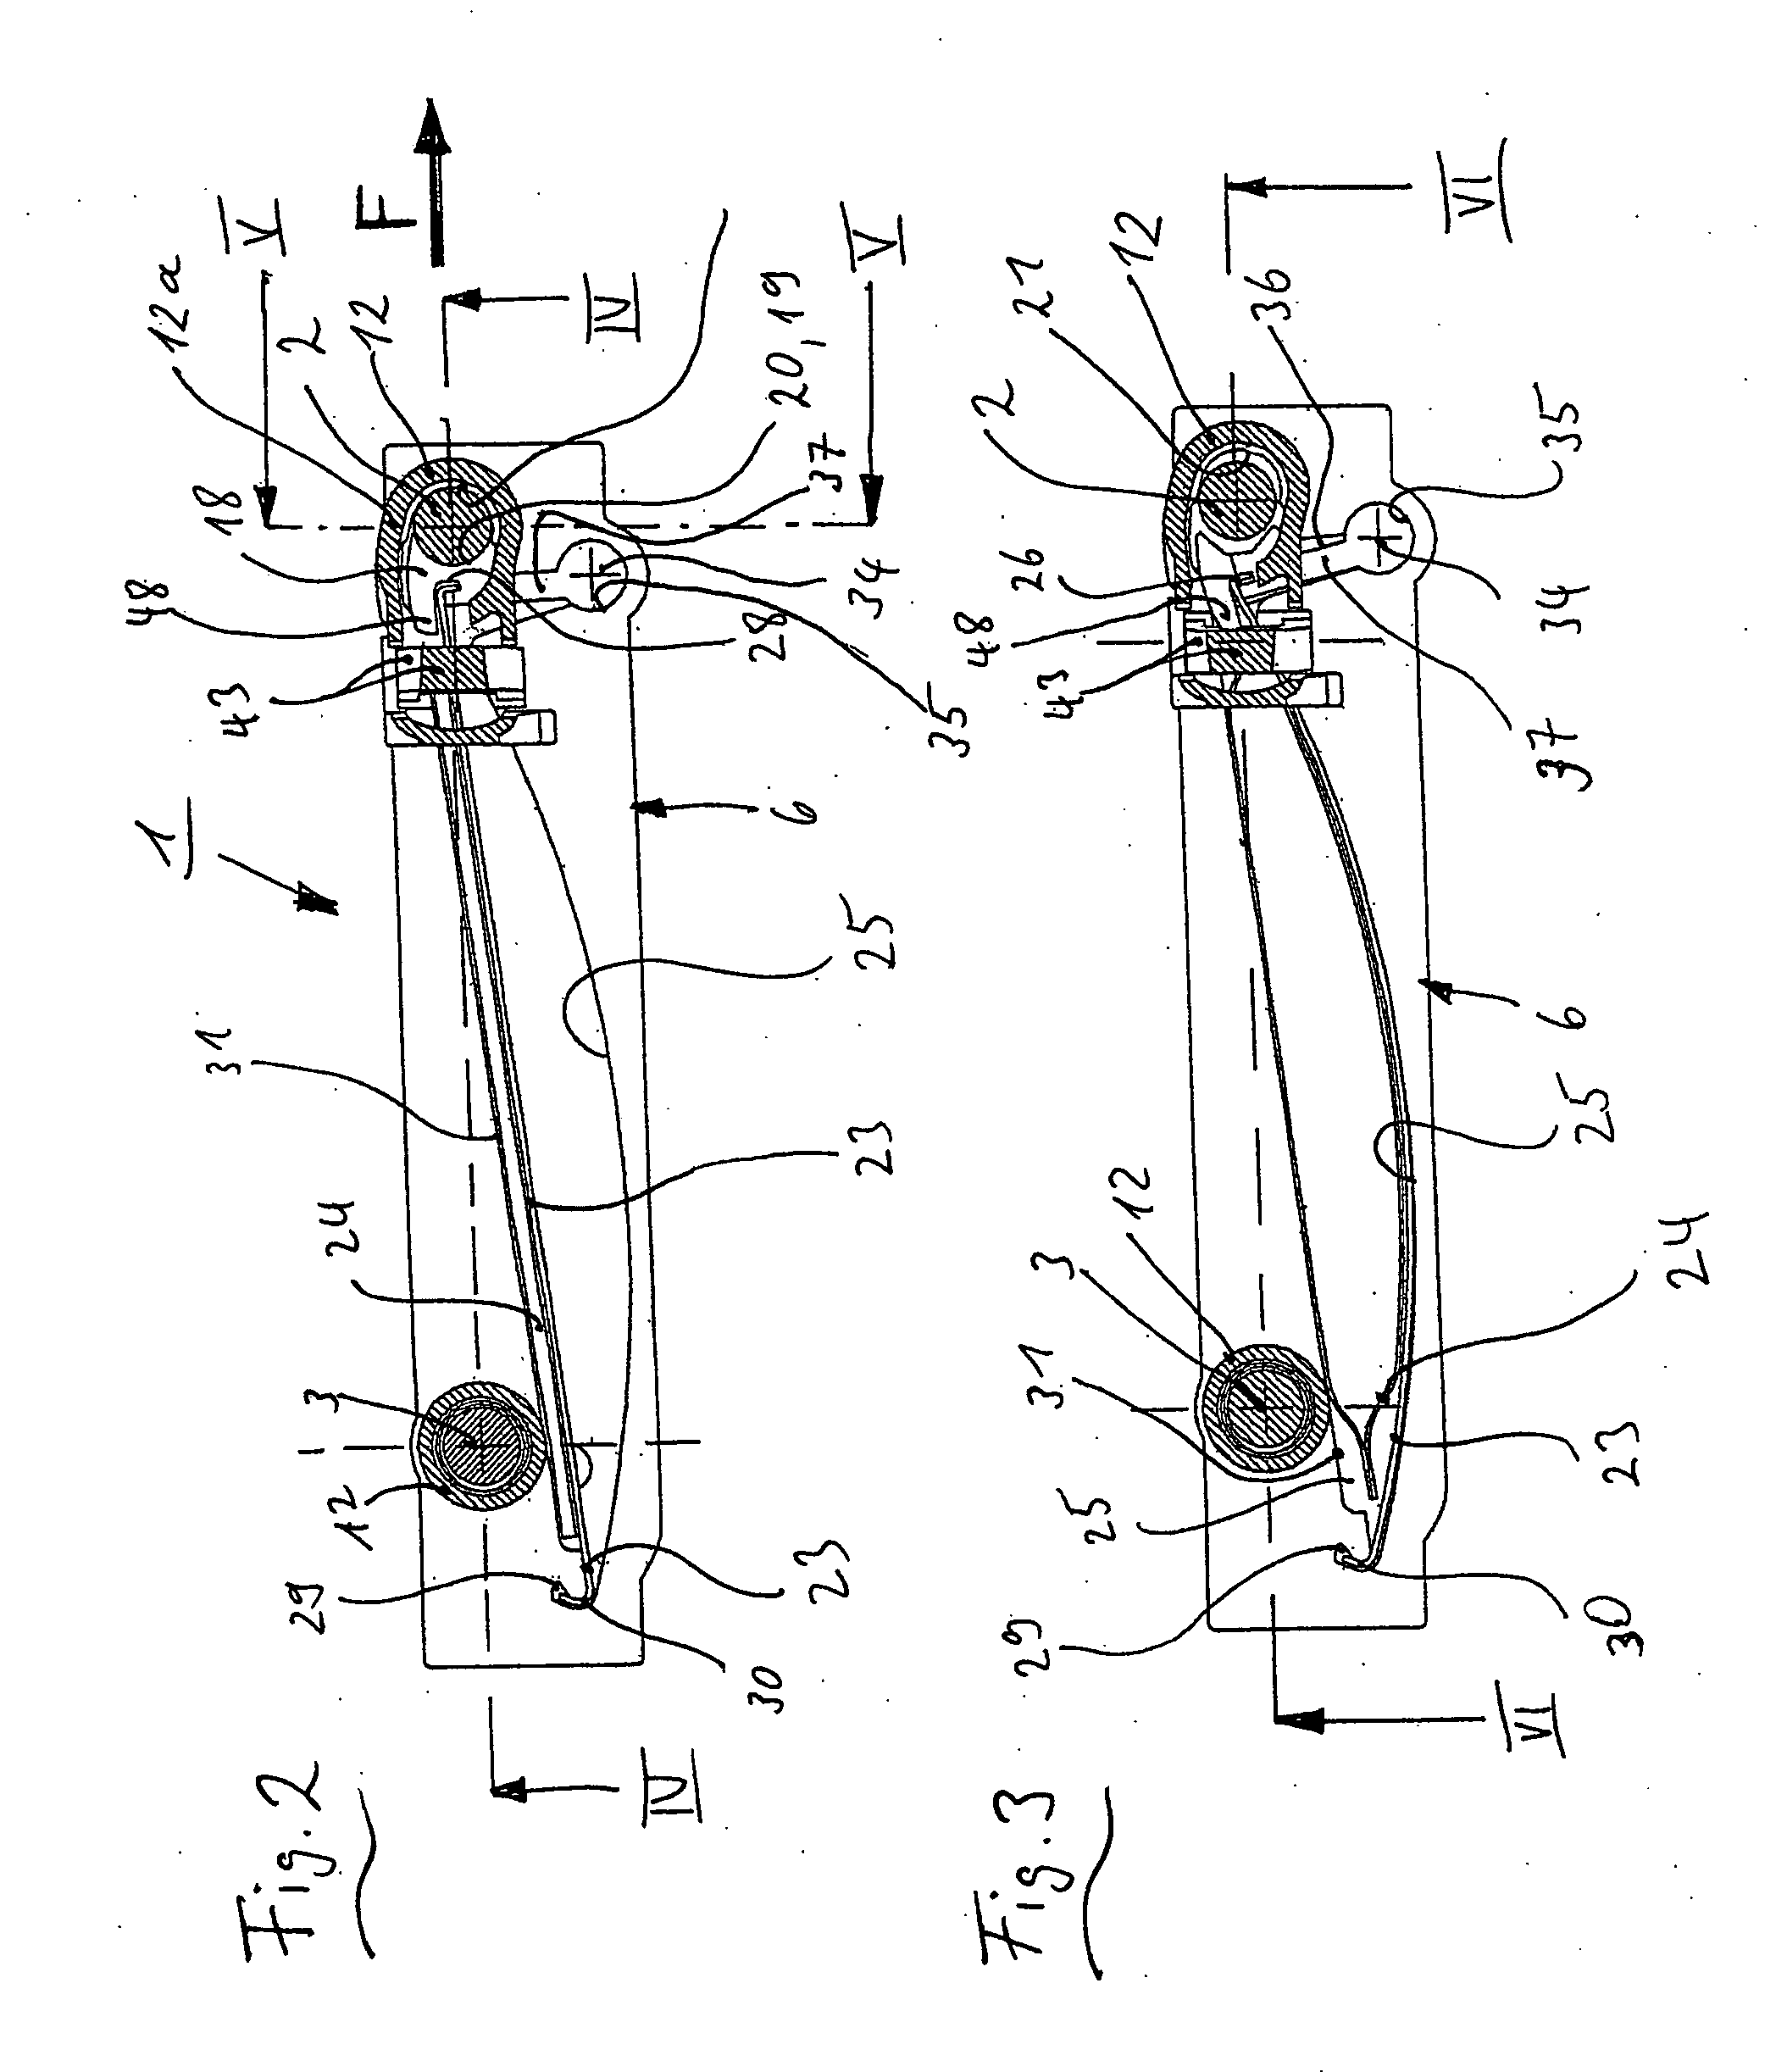 Vehicle seat with a headrest and headrest adjustment assembly